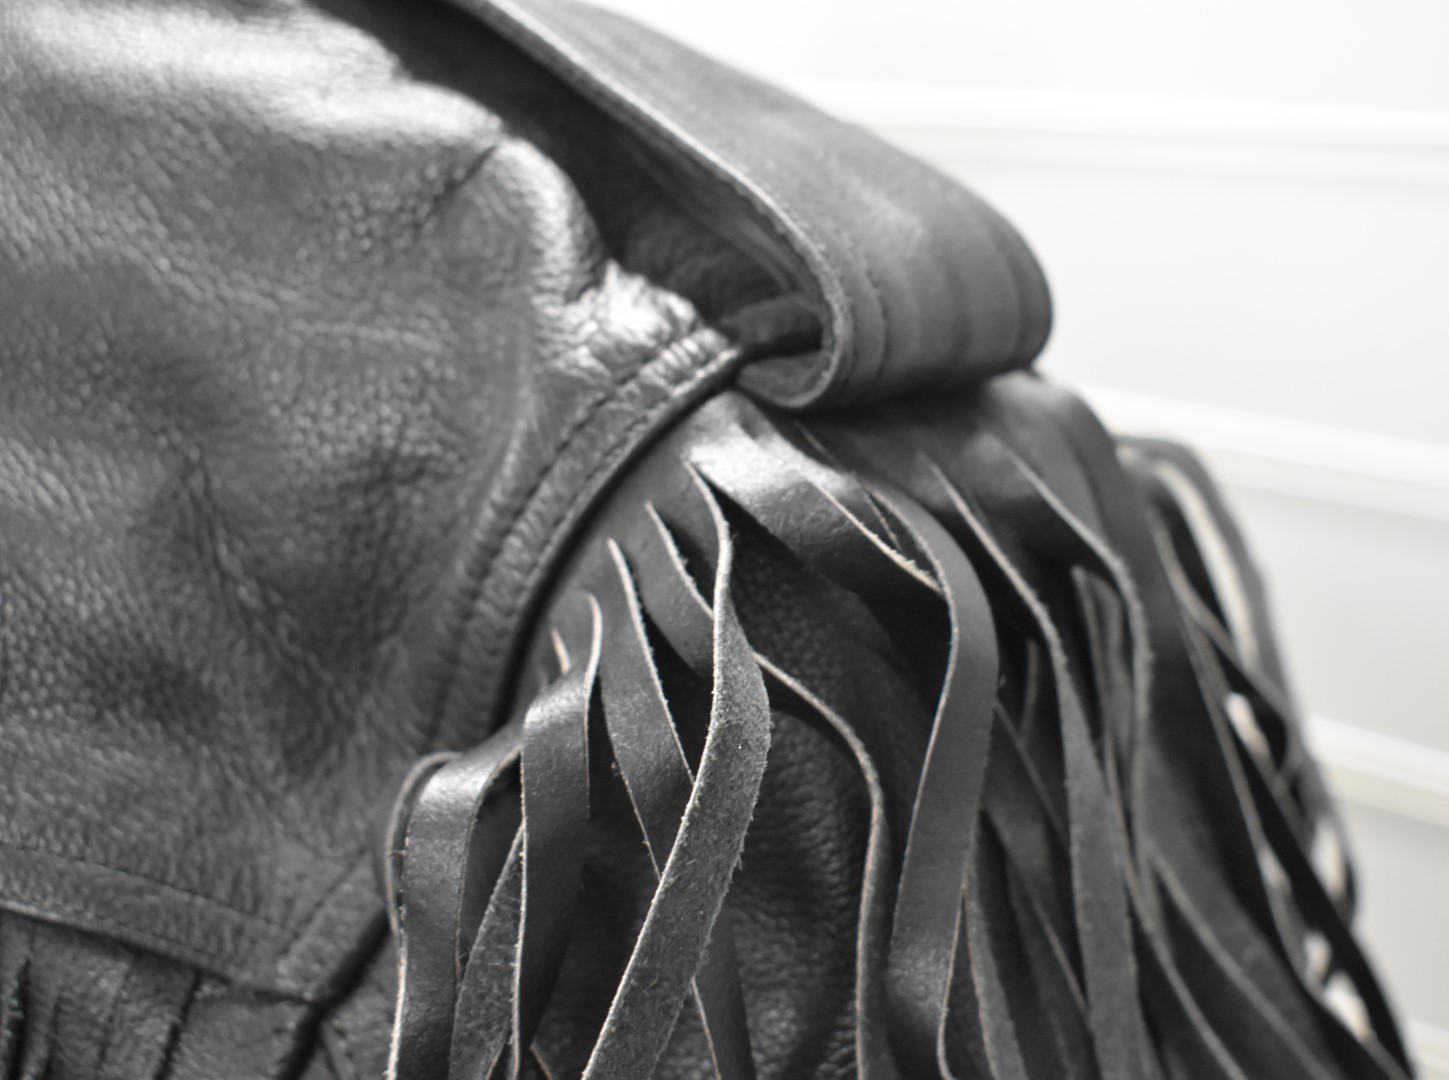 Hunter Class fringed leather motorcycle jacket and a waistcoat by Heavy Duty Leather Company, both - Image 16 of 24